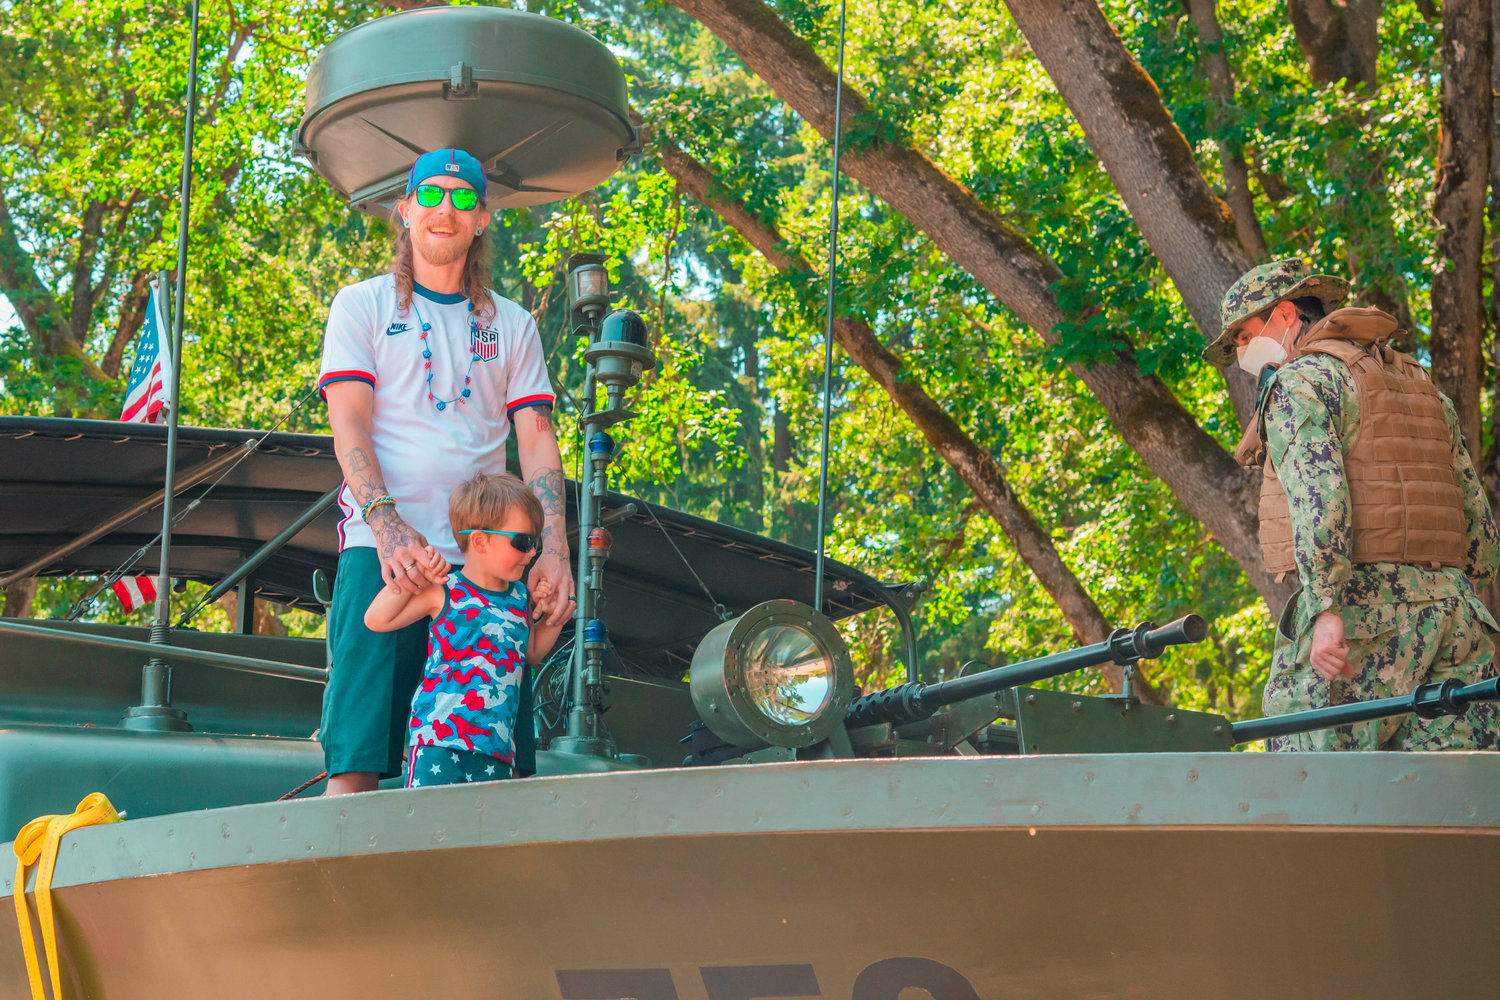 Dustin and his son Lukas sport red, white, and blue attire while standing on a Vietnam Era PBR boat at Borst Park Sunday afternoon in Centralia during Summerfest.